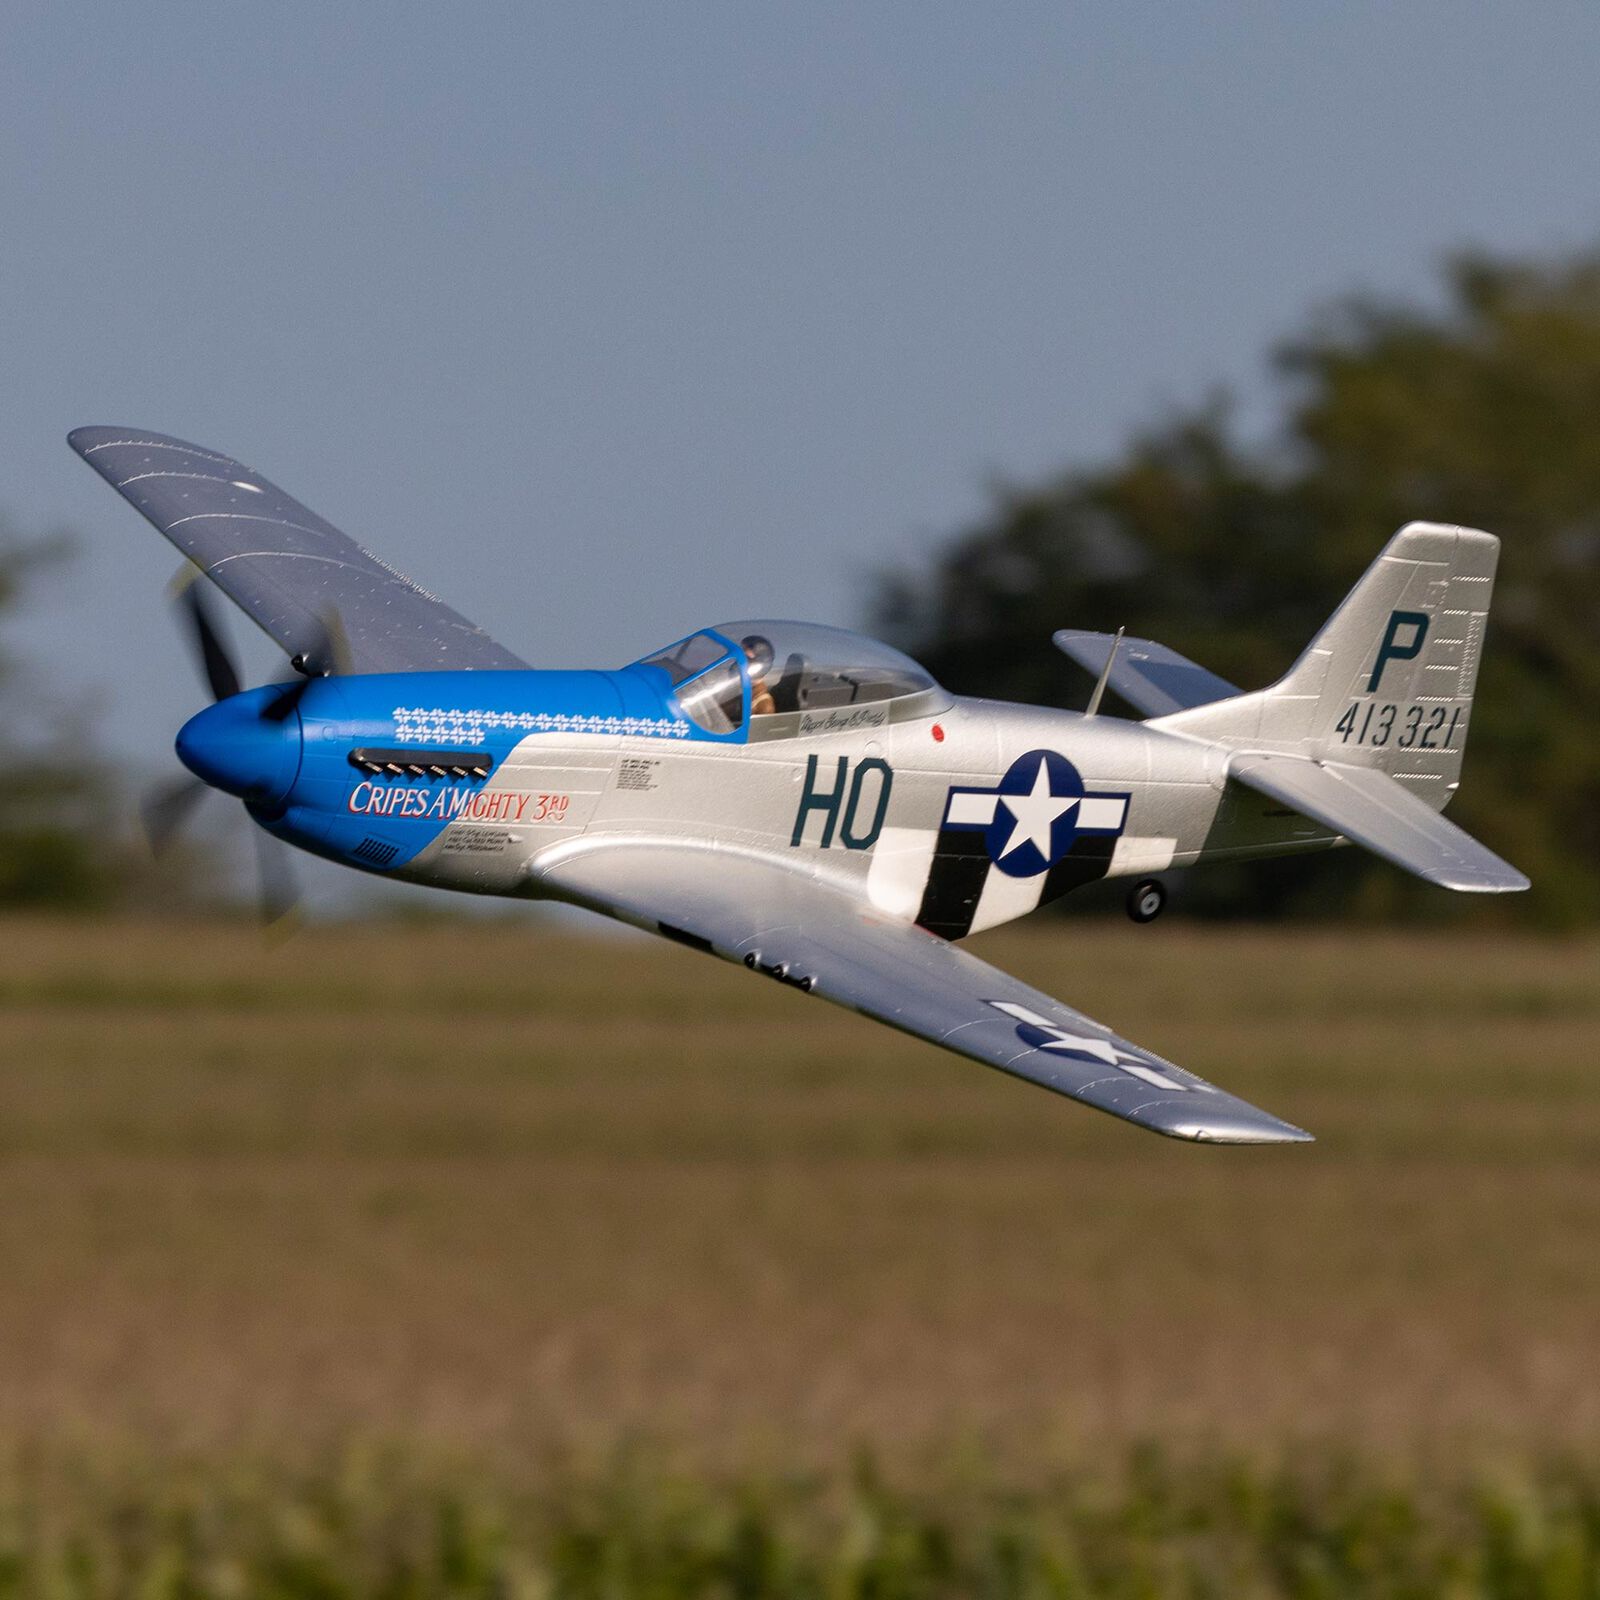 E-flite P-51D Mustang 1.2m BNF Basic with AS3X and SAFE Select “Cripes  A'Mighty 3rd”